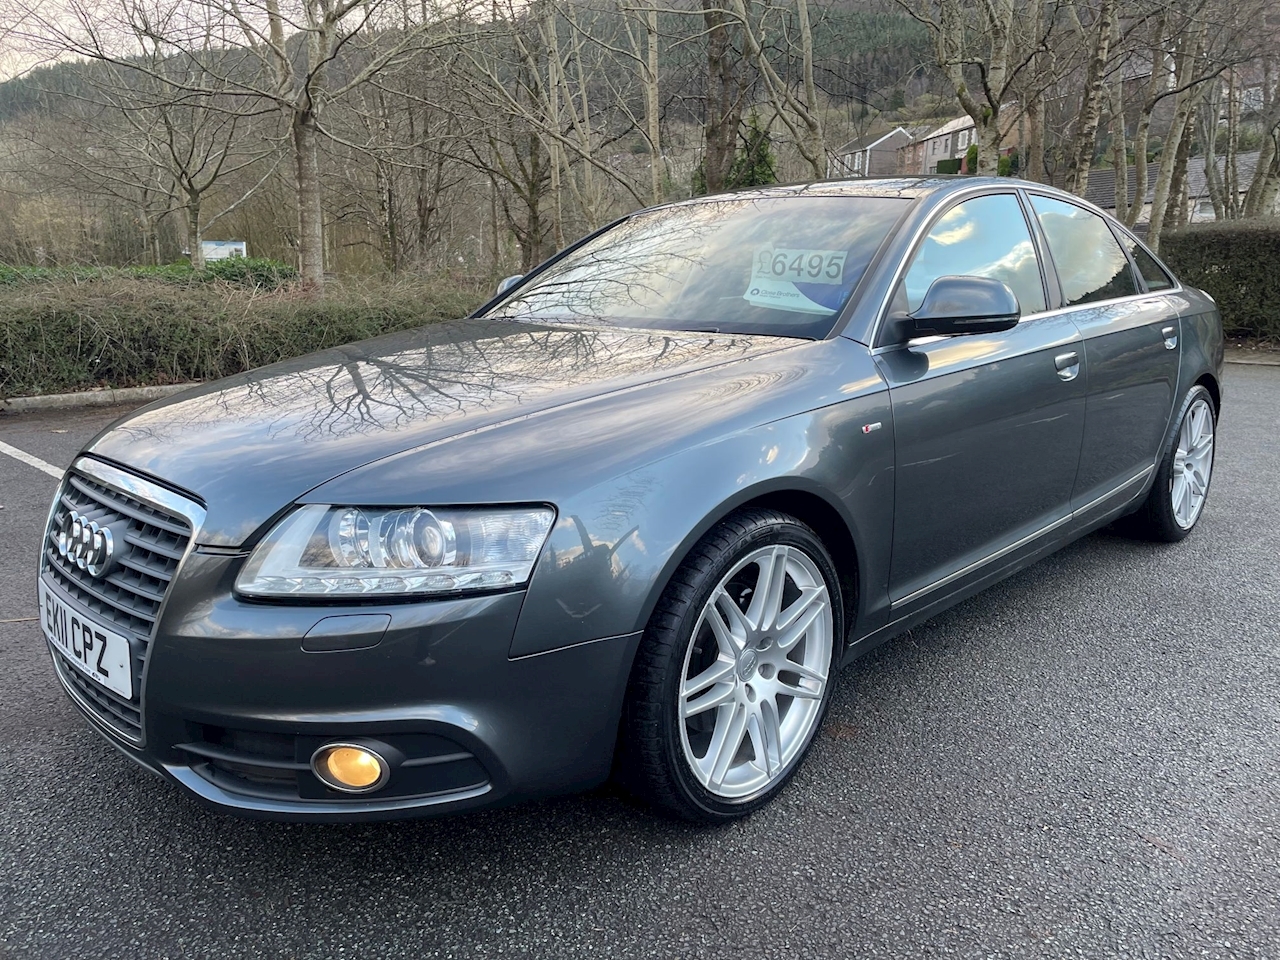 2.0 TDI S line Special Edition Saloon 4dr Diesel Multitronic (153 g/km, 168 bhp)